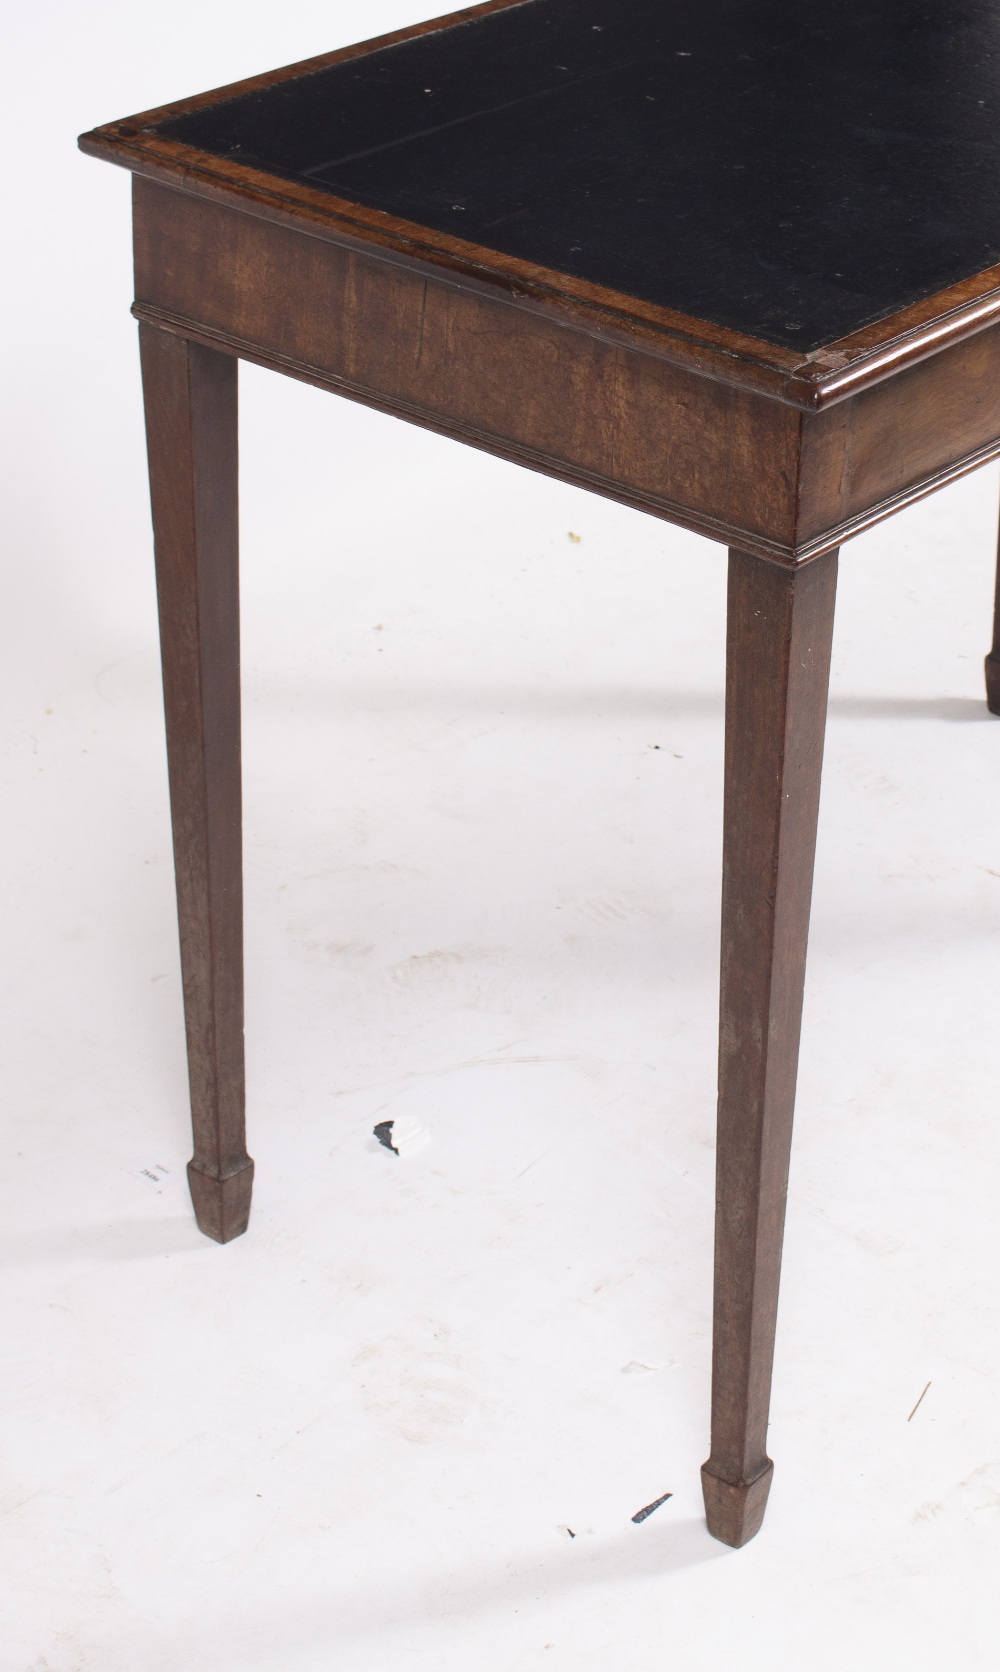 A 19TH CENTURY MAHOGANY SIDE TABLE with a black leather inset top and square tapering legs - Image 5 of 5